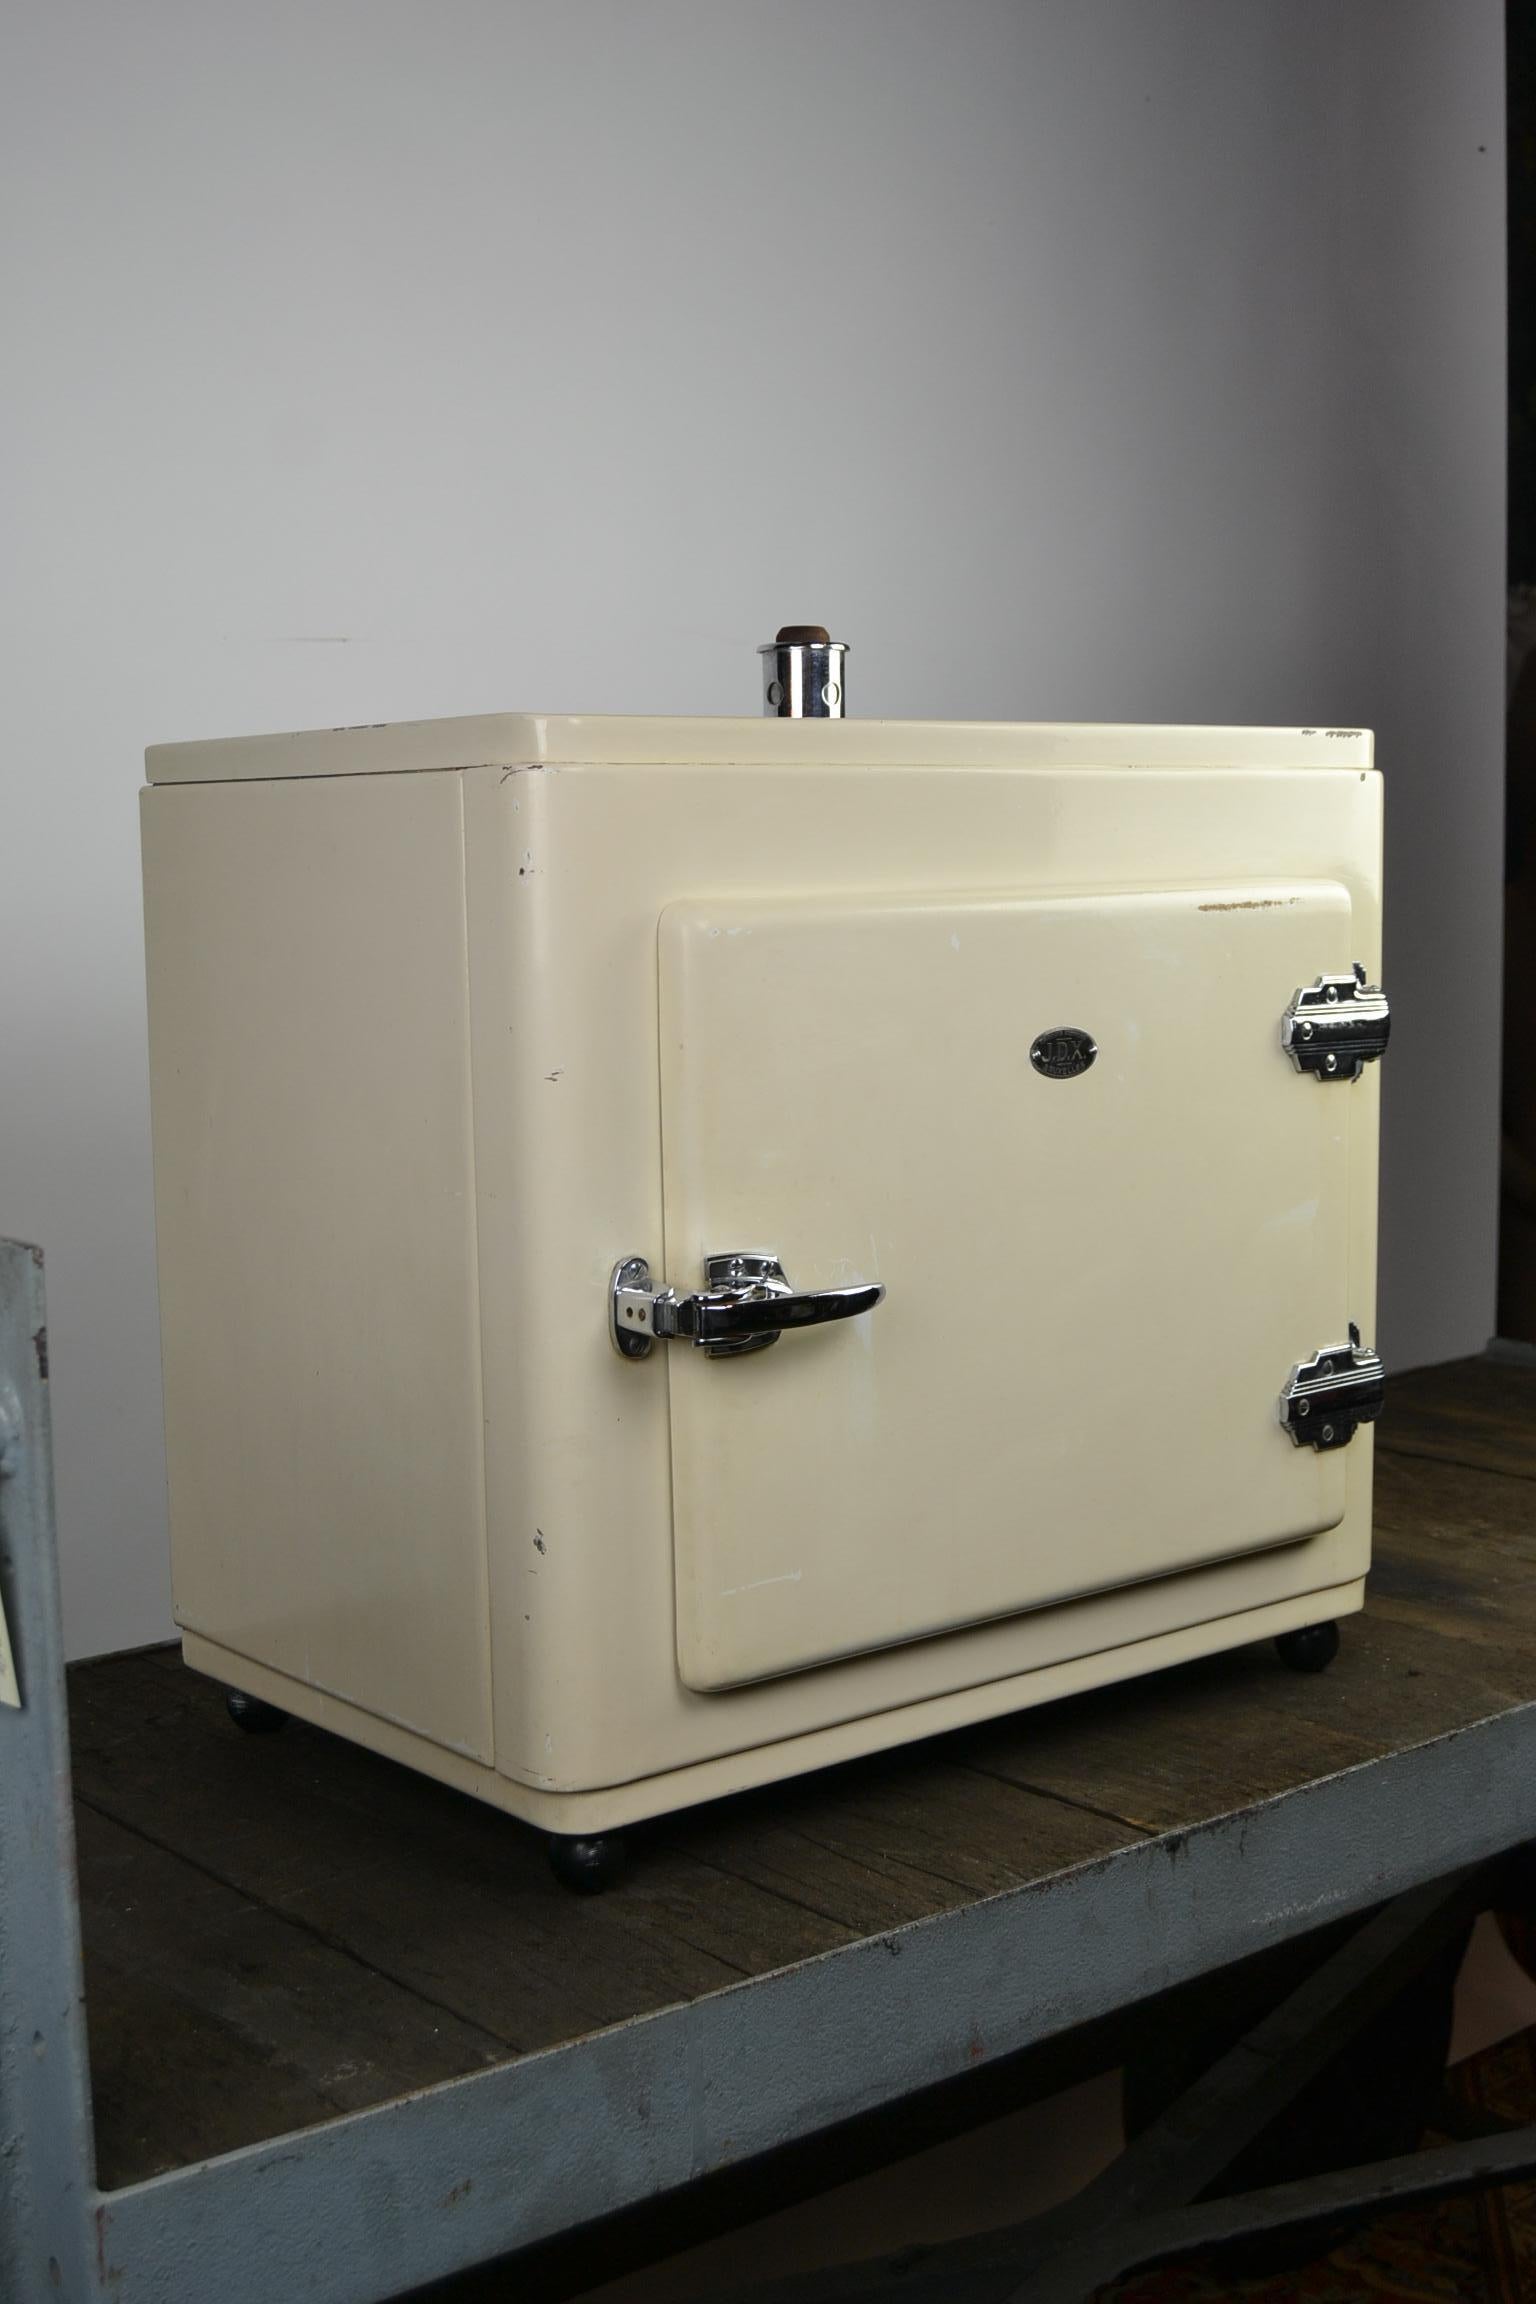 1950s metal sterilizer cabinet.
This vintage medical equipment was to sterilize equipment for medical purposes.
This sterile unit was made in Belgium by the Company: J.D.X Brussels, a Belgian Company specialised in Scientific Instruments. The logo